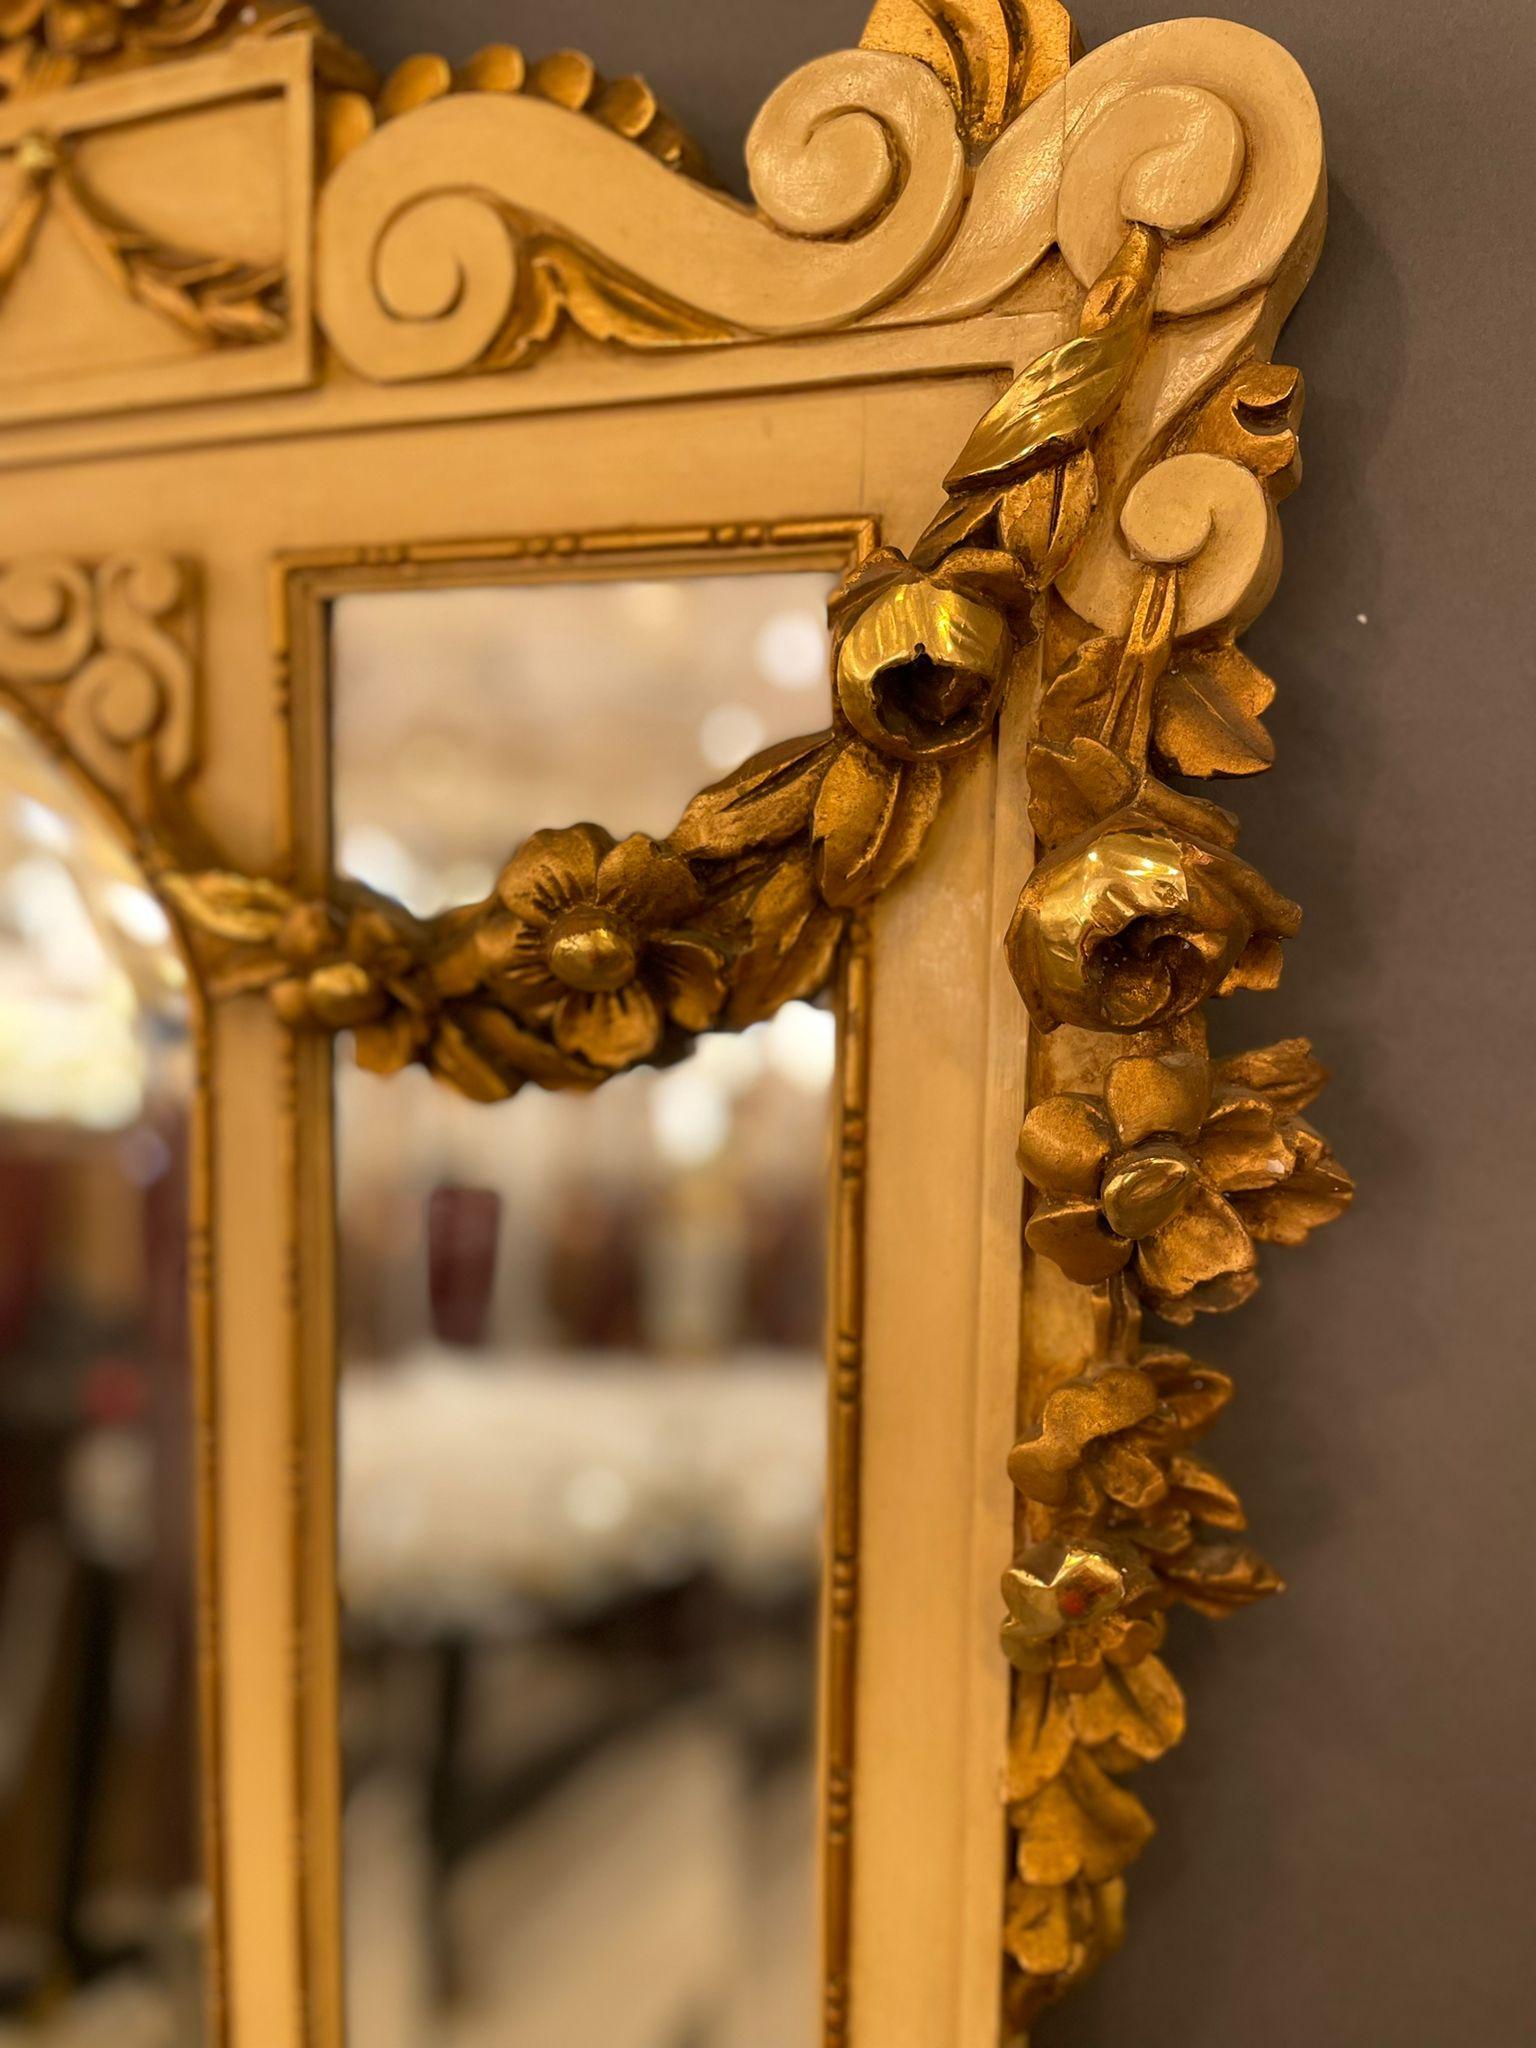 An elegant Jansens French Louis XVI style with a gilt-wood mirror, late 19 century. The entire mirror frame is hand-carved with intricate floral motifs, overlays and gilding. You can see the age of the piece in its characteristic patina. This mirror